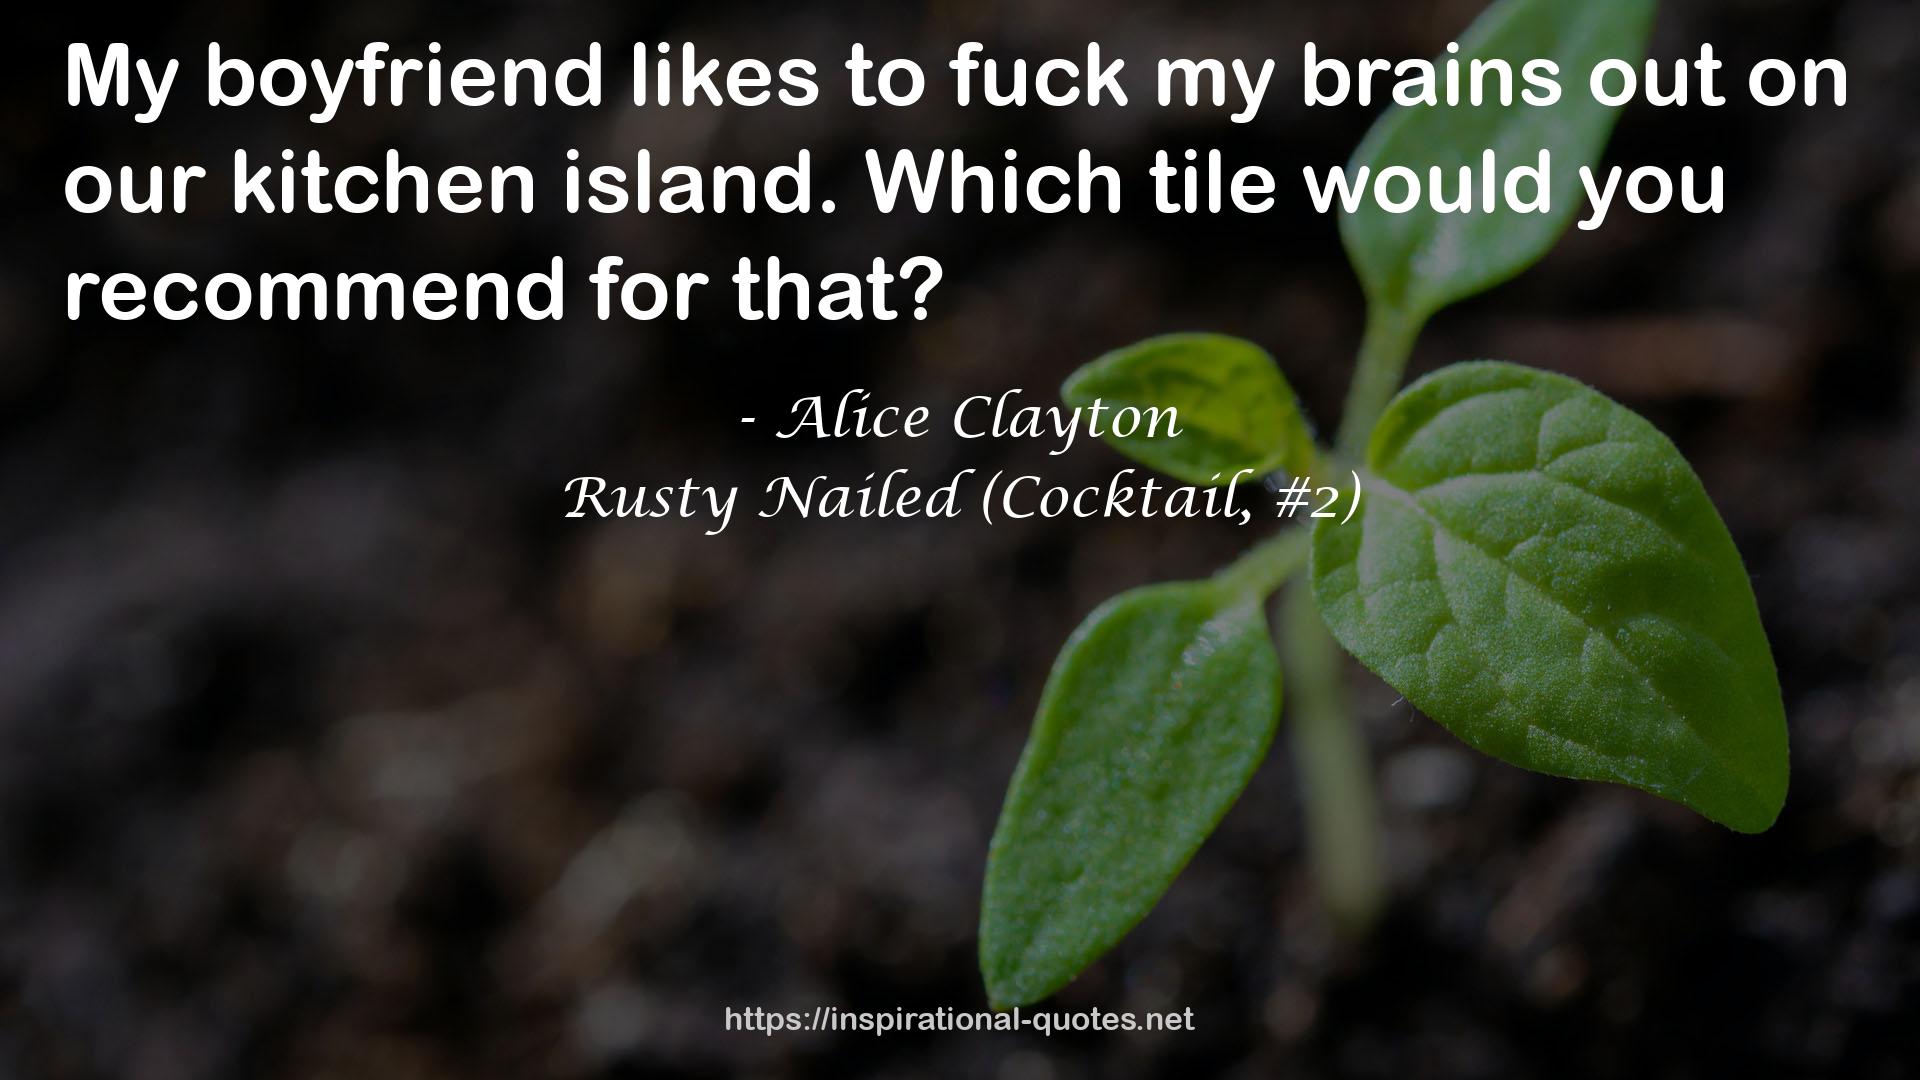 Rusty Nailed (Cocktail, #2) QUOTES